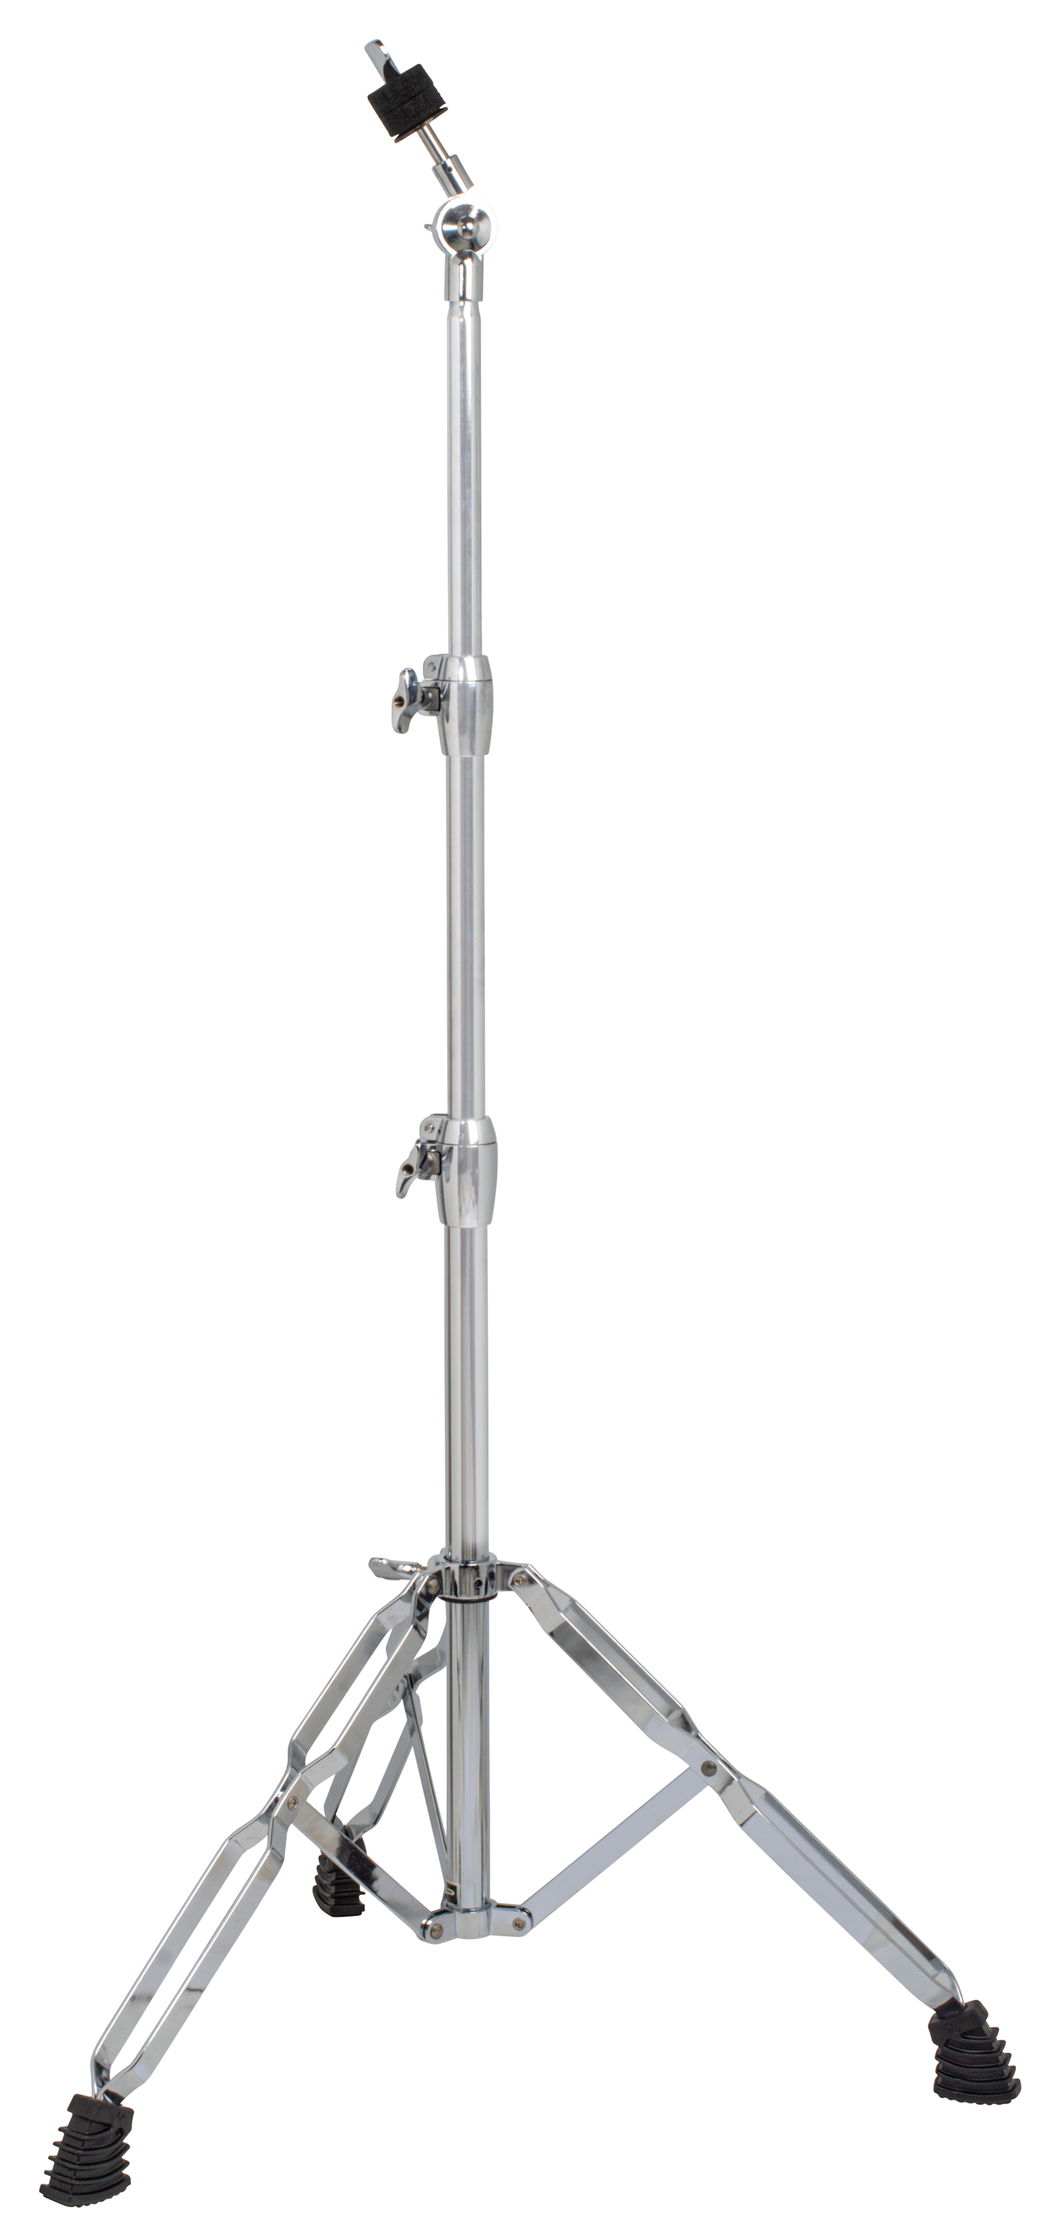 DXP DXPCS8 850 Series Straight Cymbal Stand